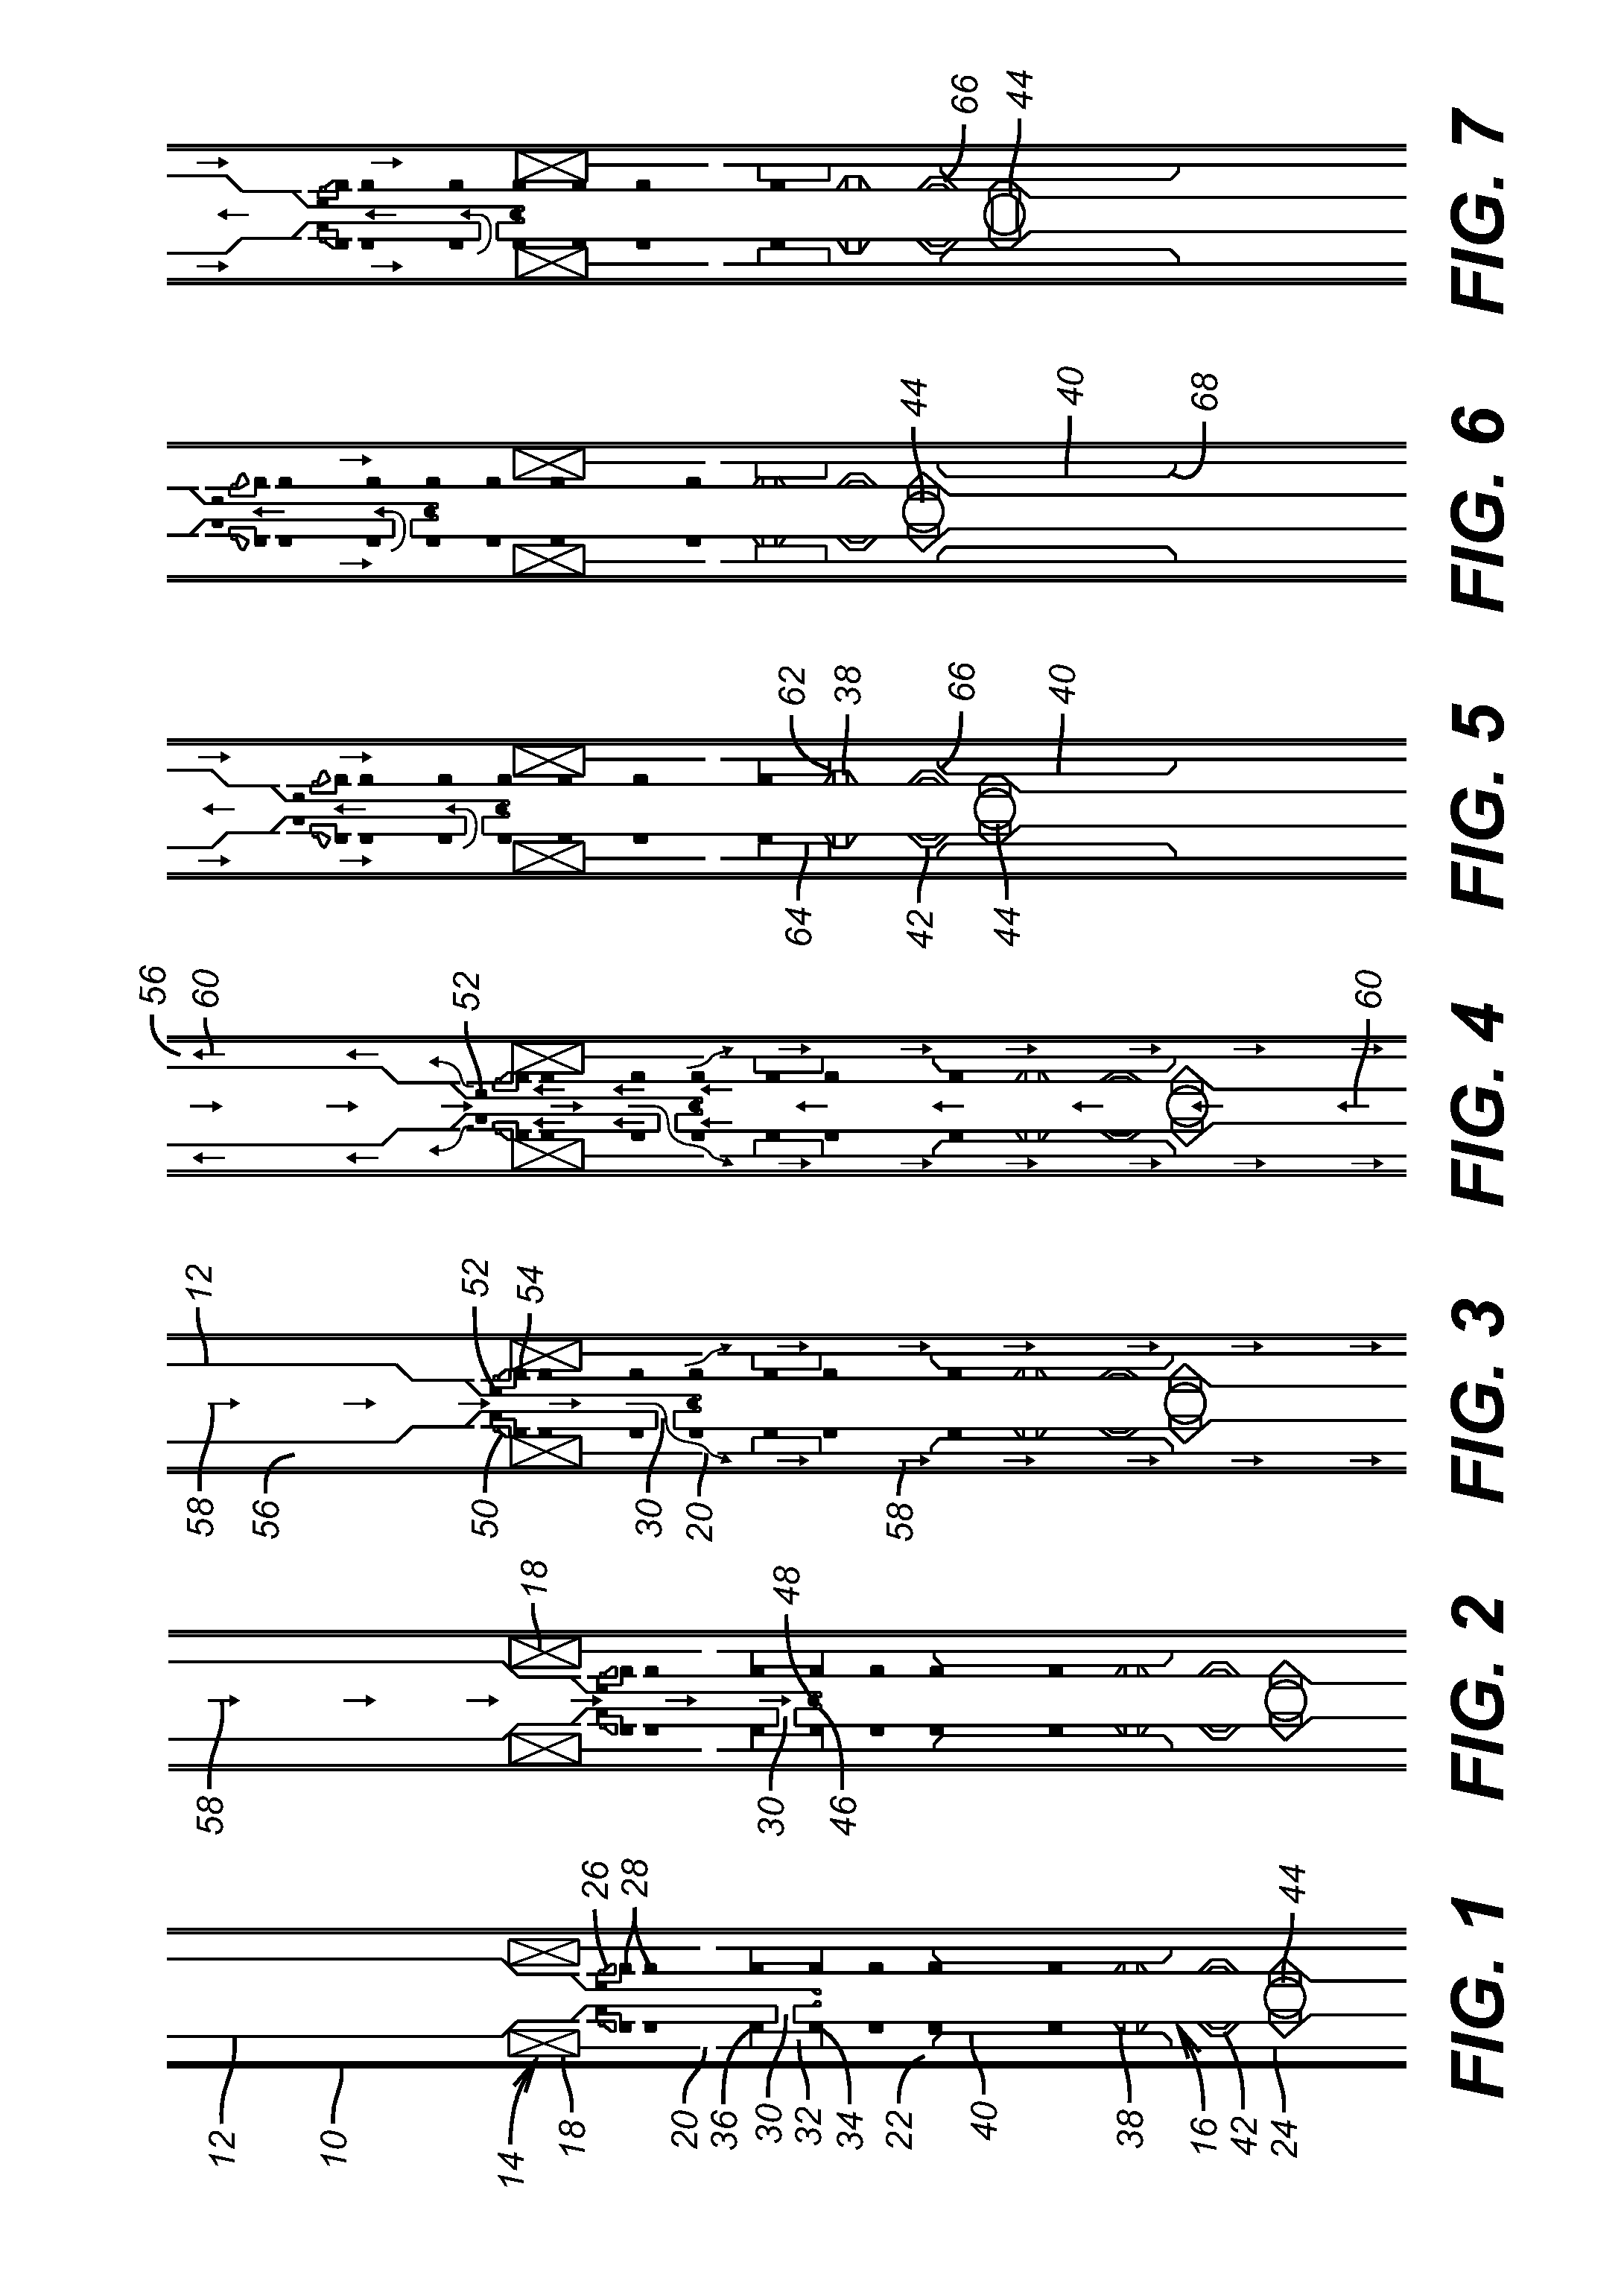 Fracturing and Gravel Packing Tool with Shifting Ability between Squeeze and Circulate while Supporting an Inner String Assembly in a Single Position